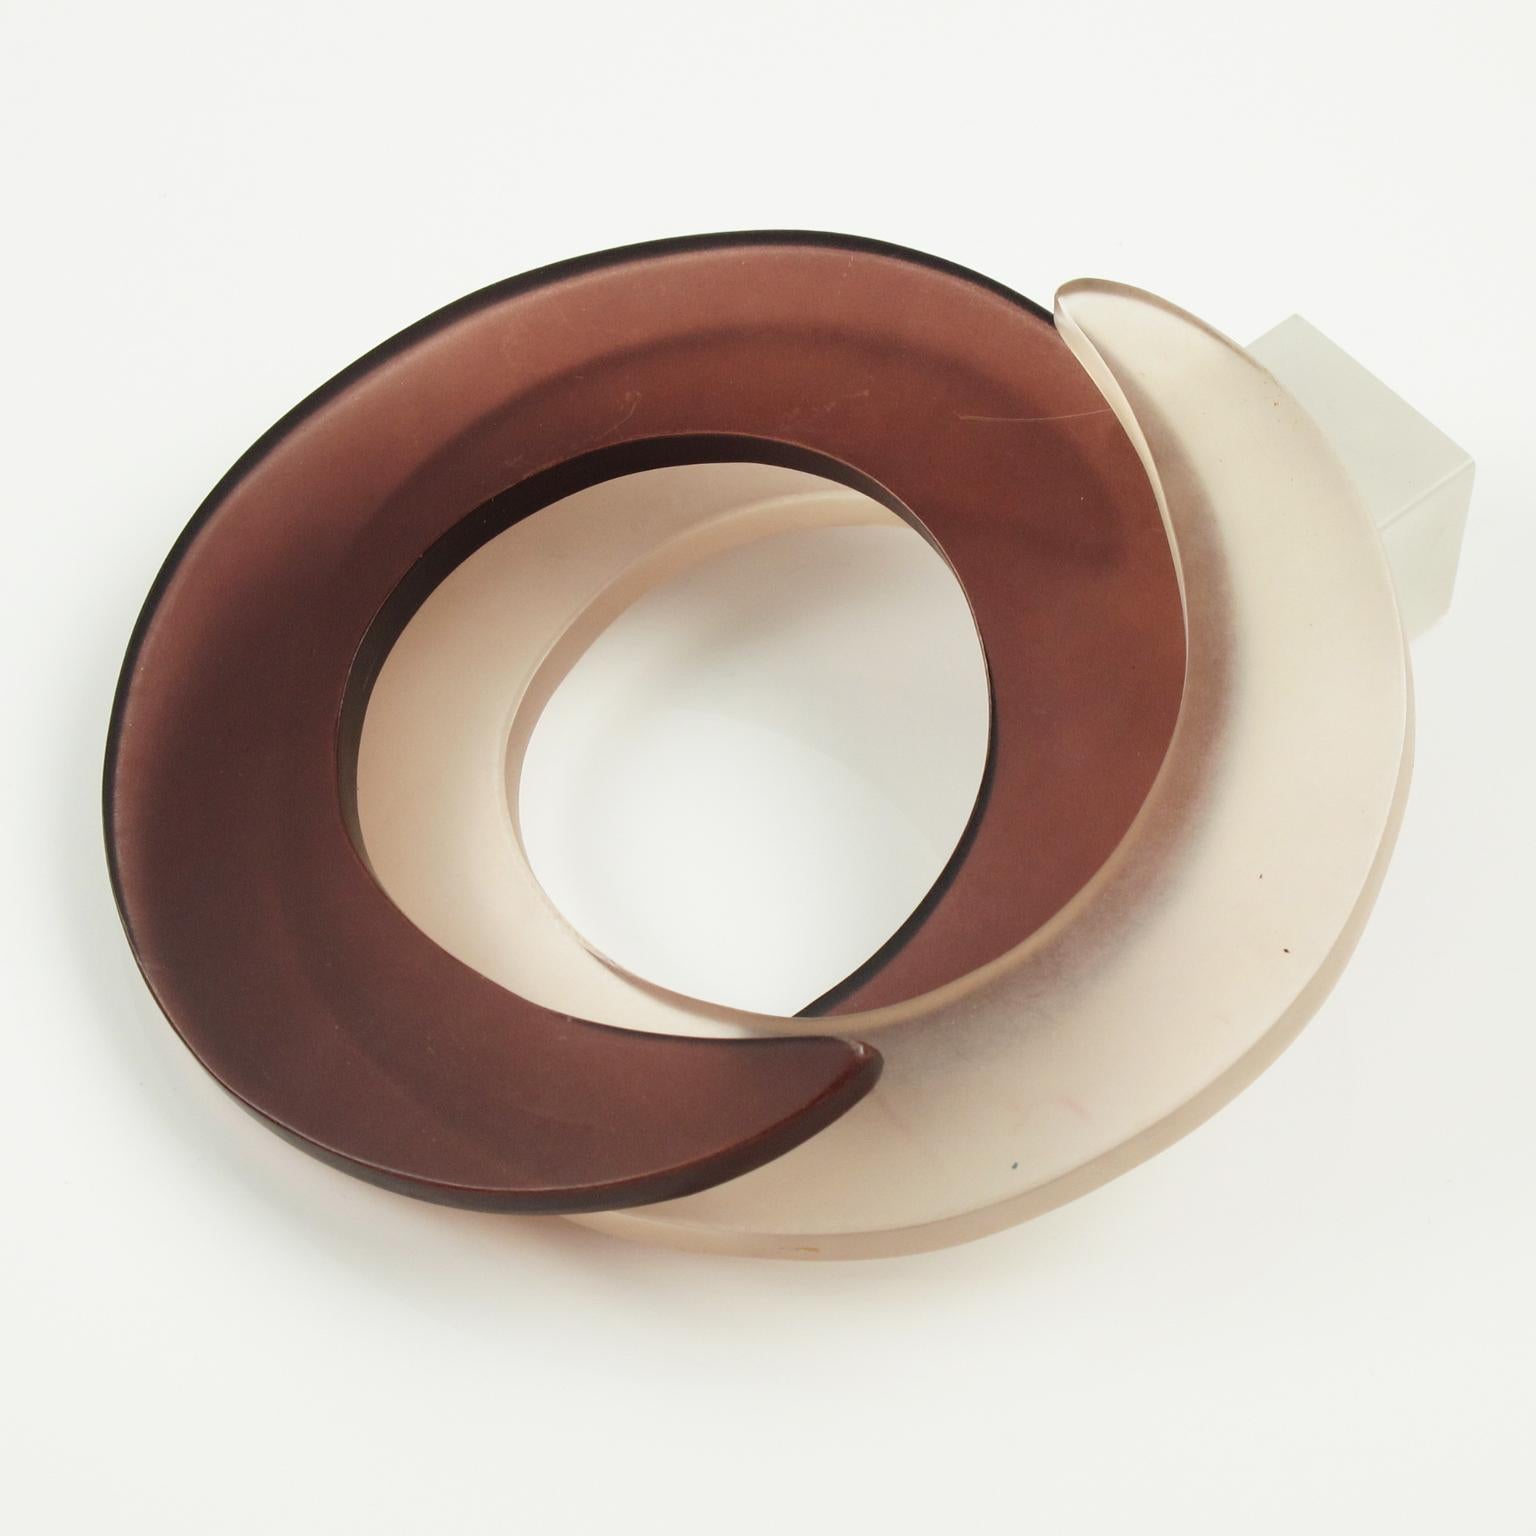 Avant Garde Frosted Lucite Coiled Bangle Bracelet, a pair In Excellent Condition For Sale In Atlanta, GA